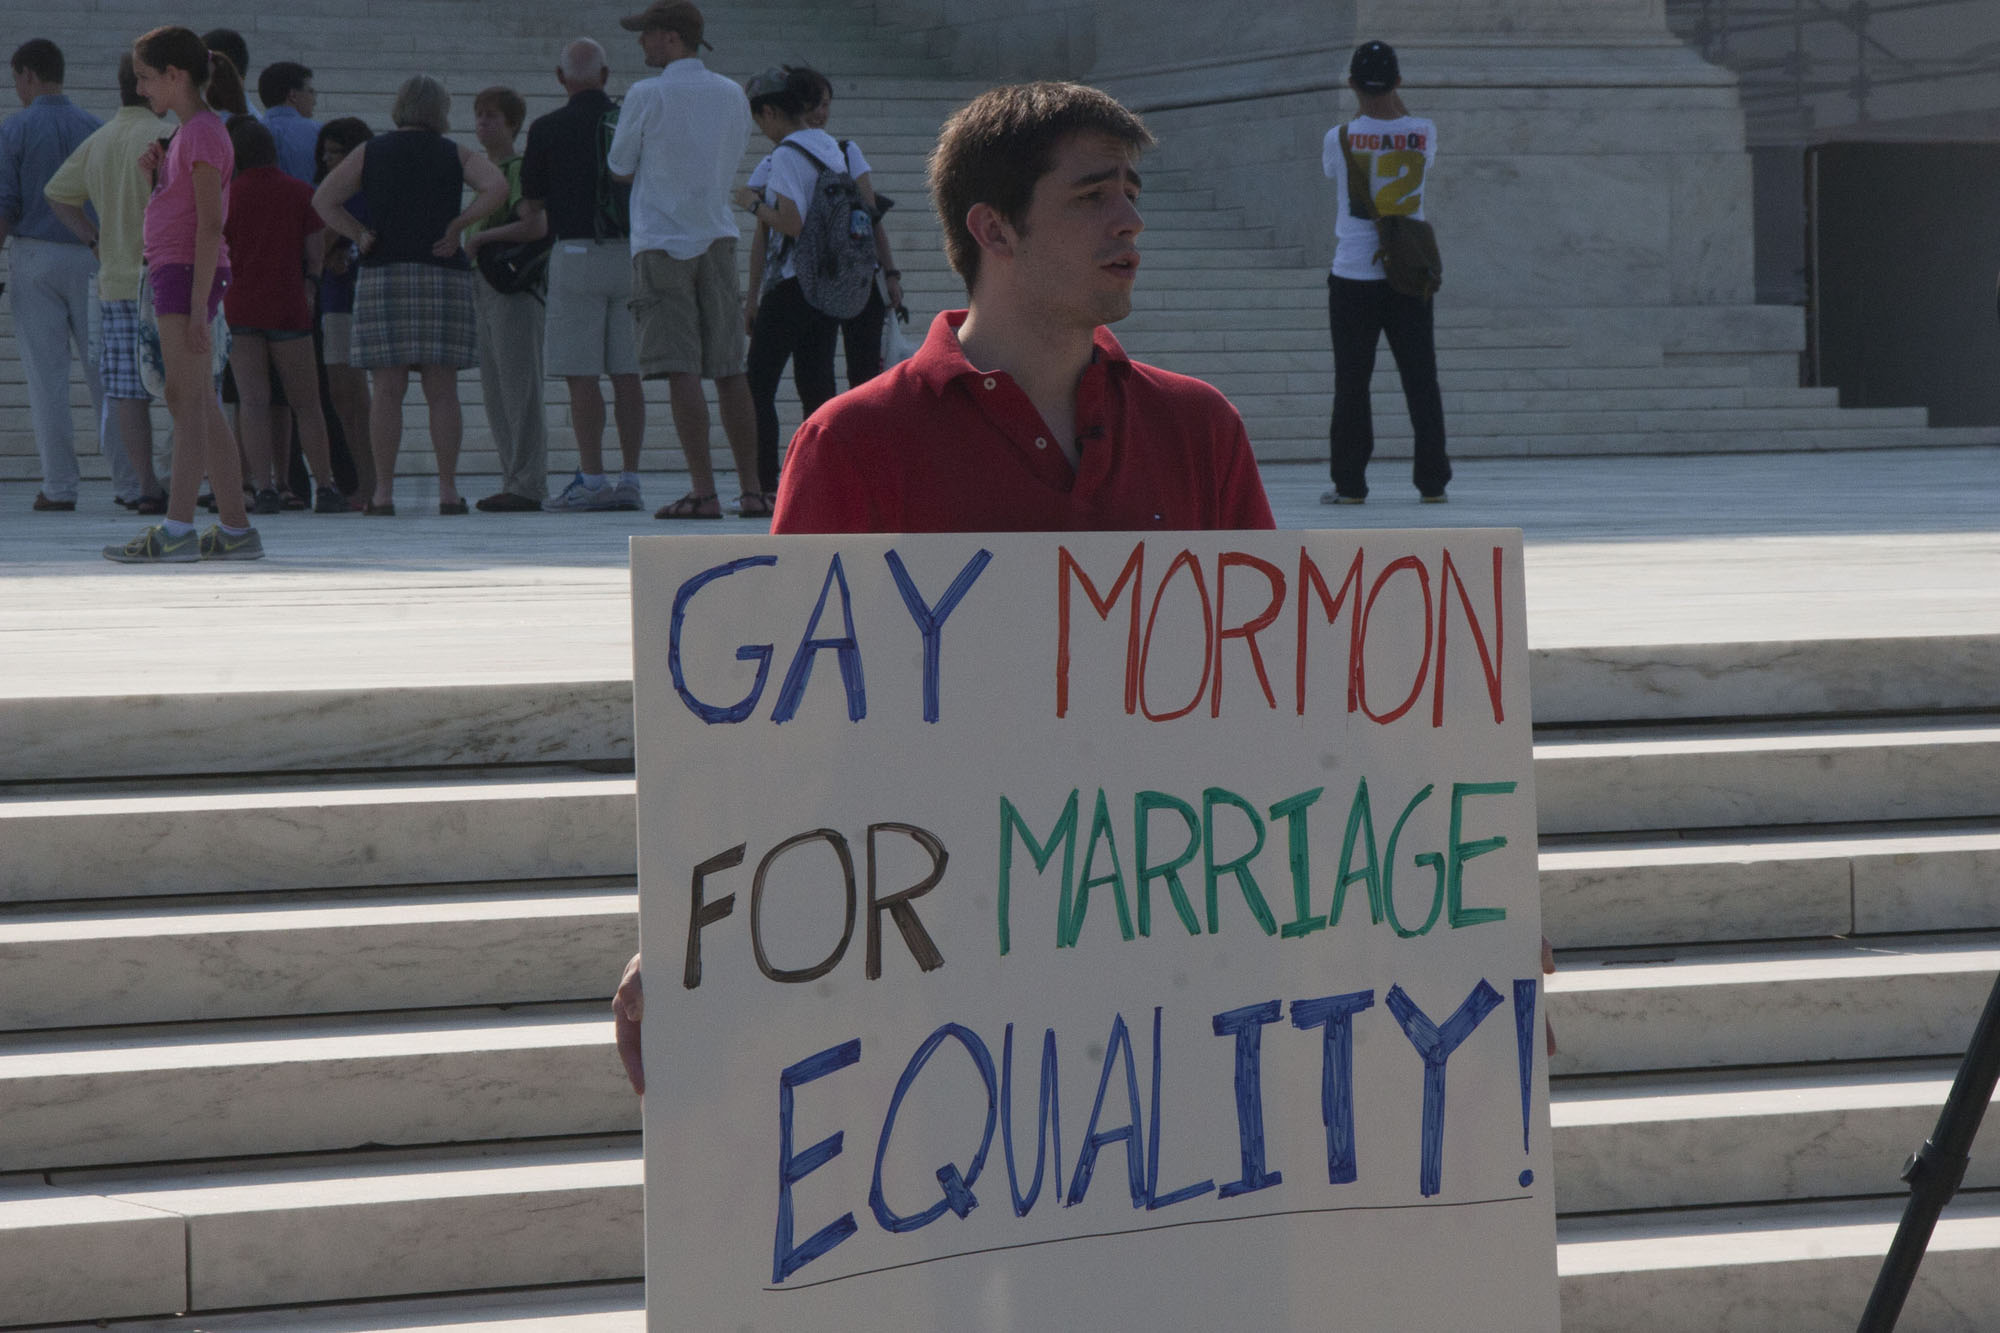 Advocates at Supreme Court ahead of same-sex marriage rulings pic